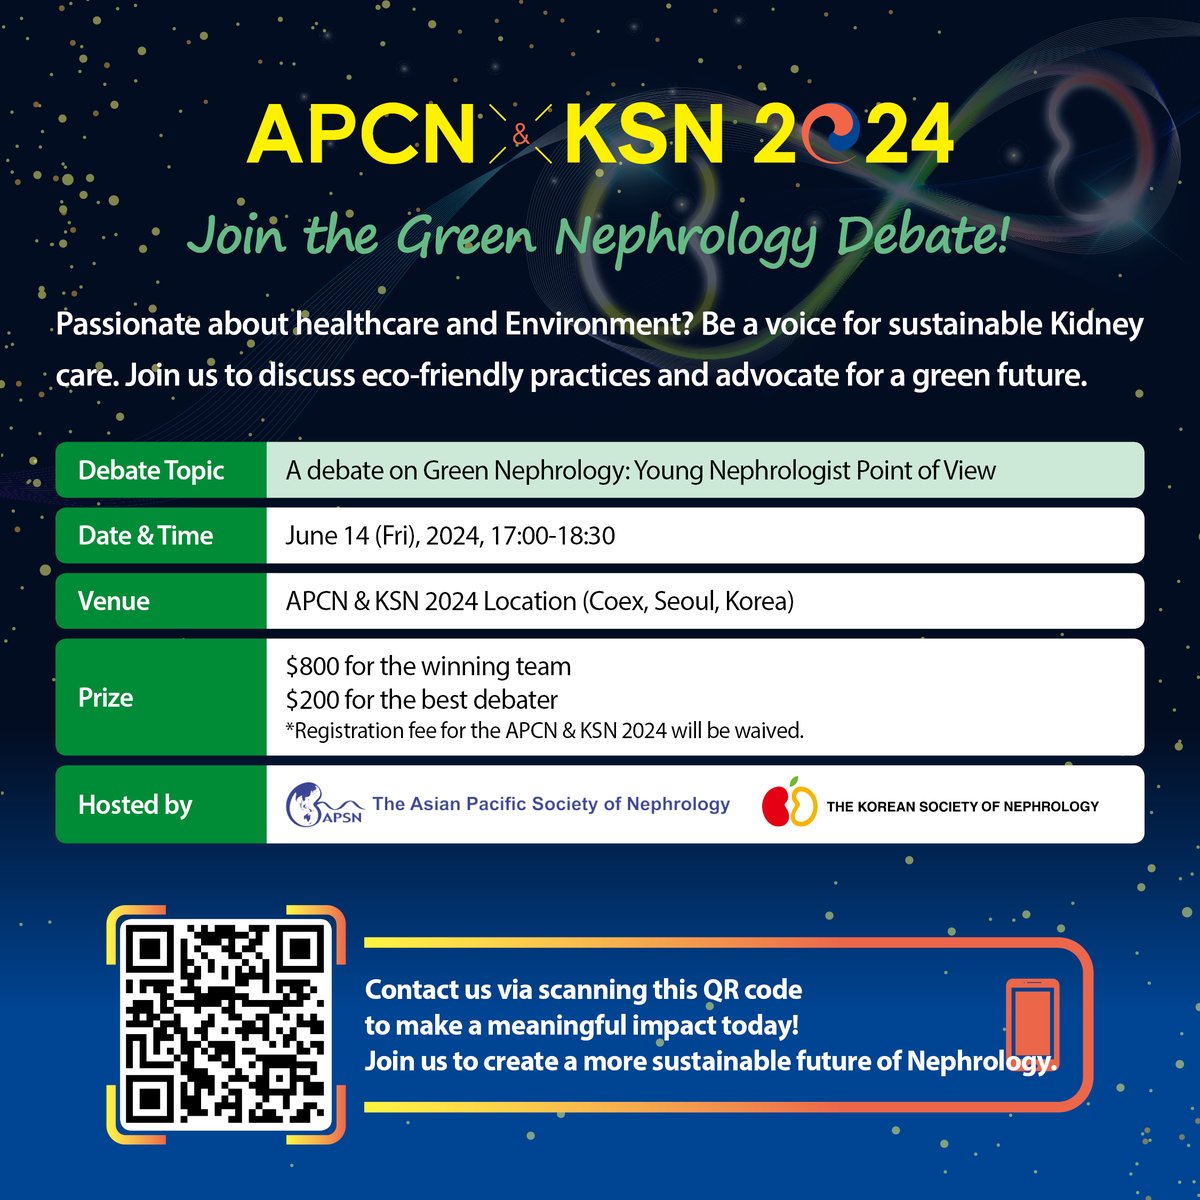 📢Call for debaters 📢 Join our debate and win the prize 🤩 Welcome all young nephrologists to apply to be a debater in this very interesting session at APCN2024. Just follow the link: forms.gle/62D7bQjLbT8HKX… #APSN #APSNYNC